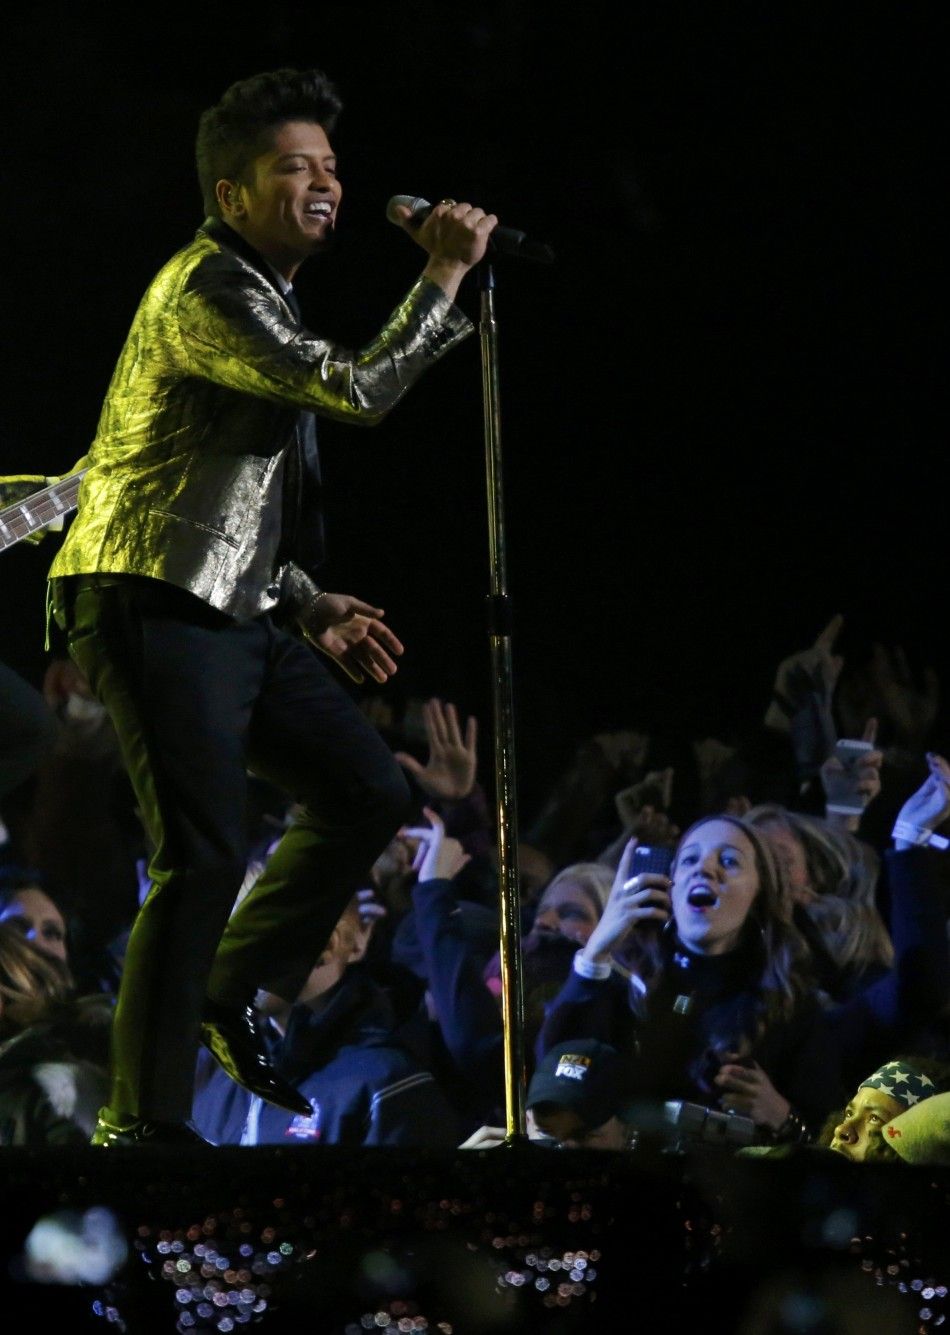 Bruno Mars Performs During the Halftime Show of the NFL Super Bowl XLVIII Football Game Between the Denver Broncos and the Seattle Seahawks in East Rutherford